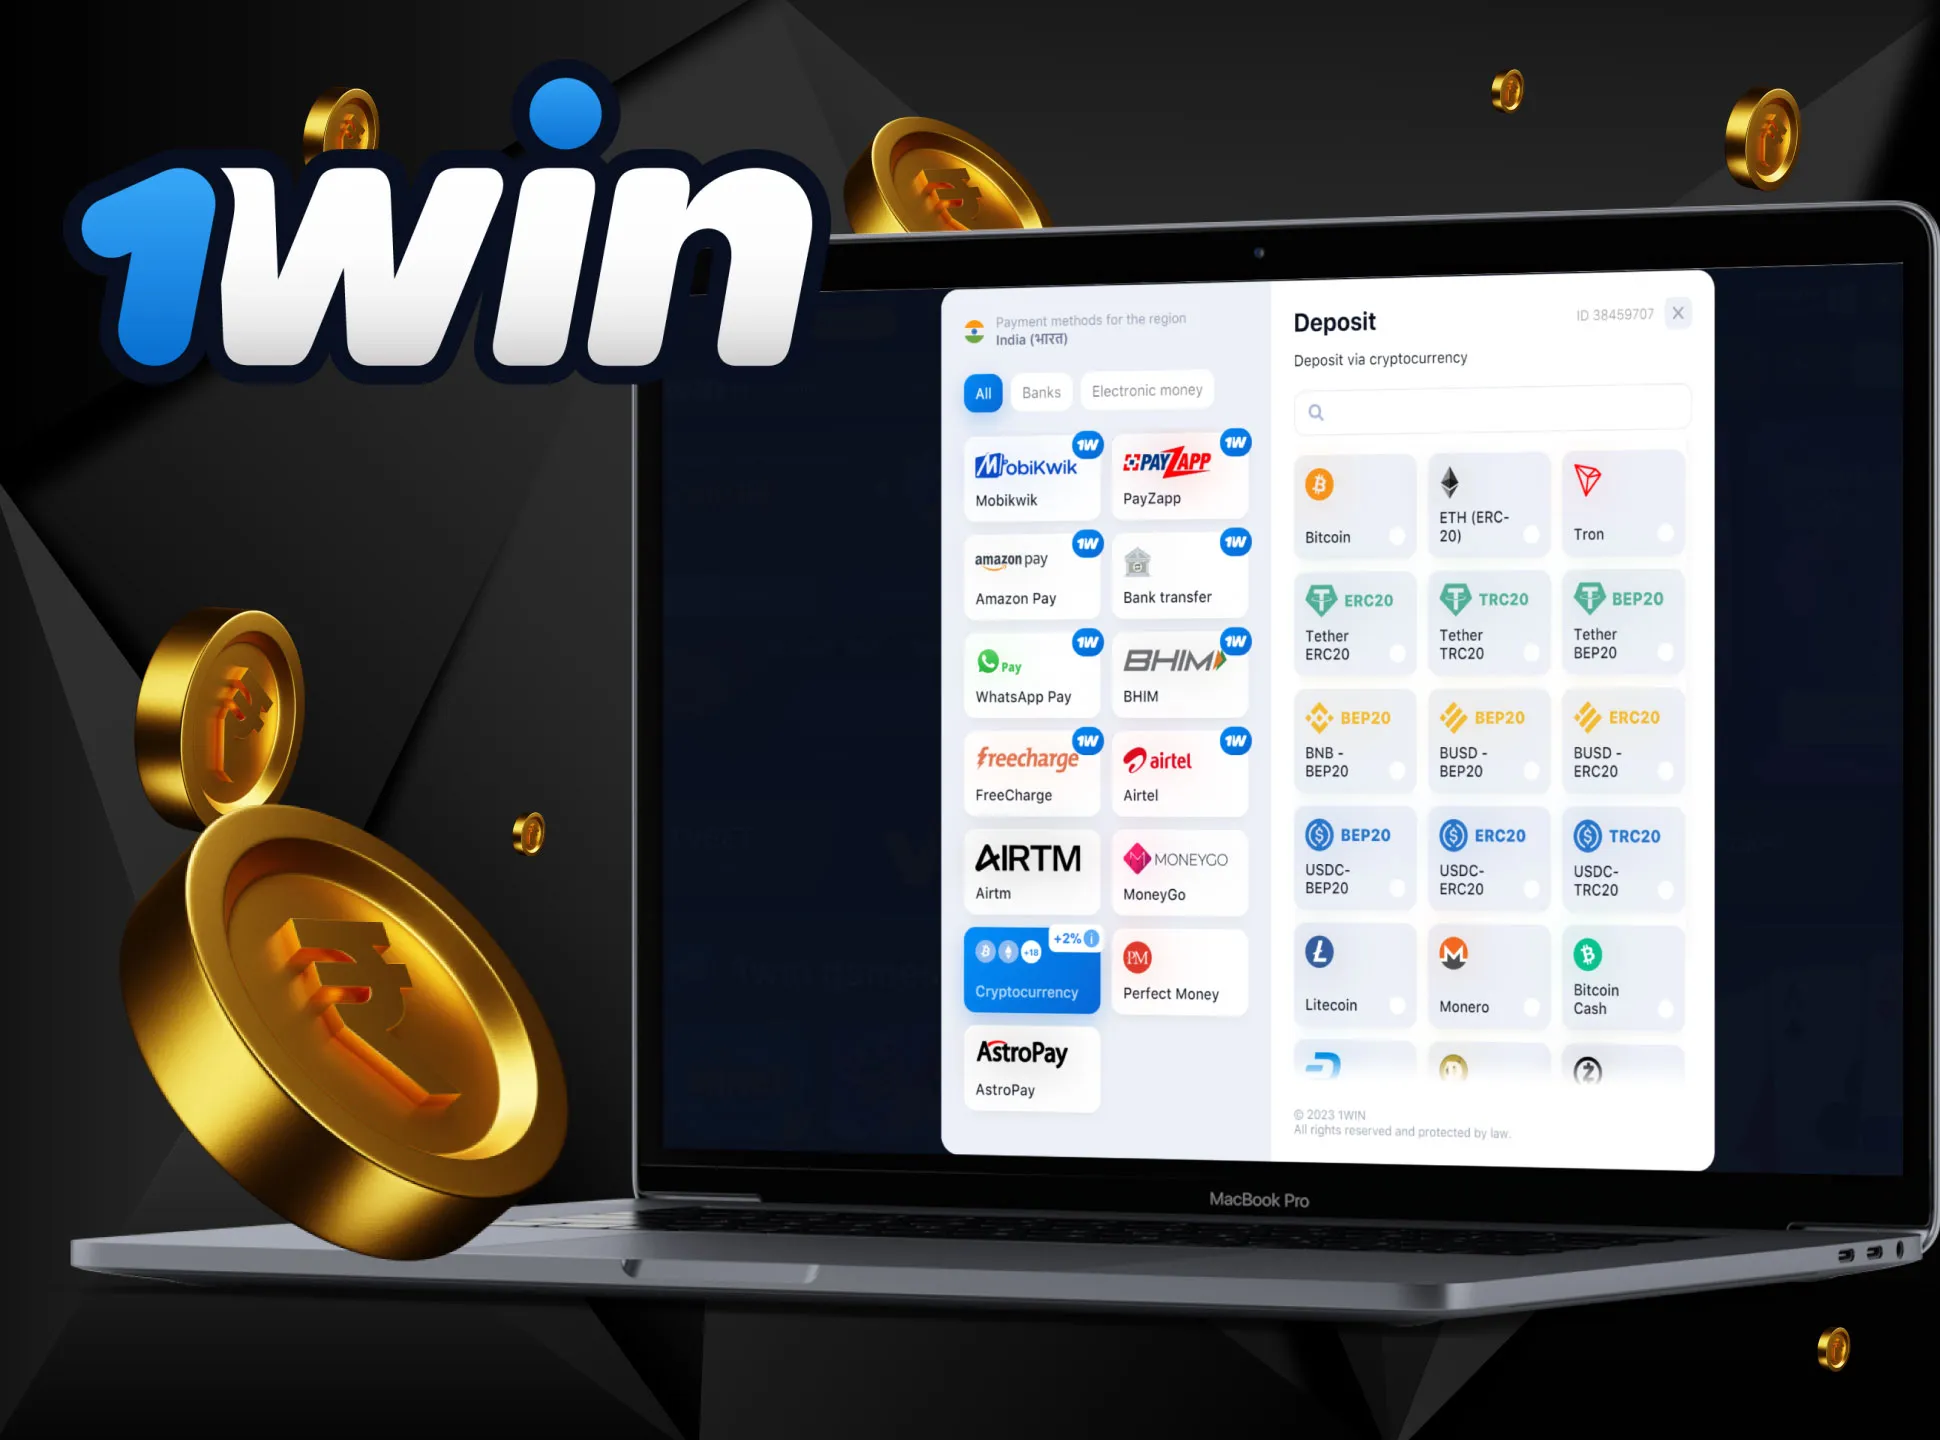 Sign up for 1win, tip up your account in cryptocurrency and place a bet.